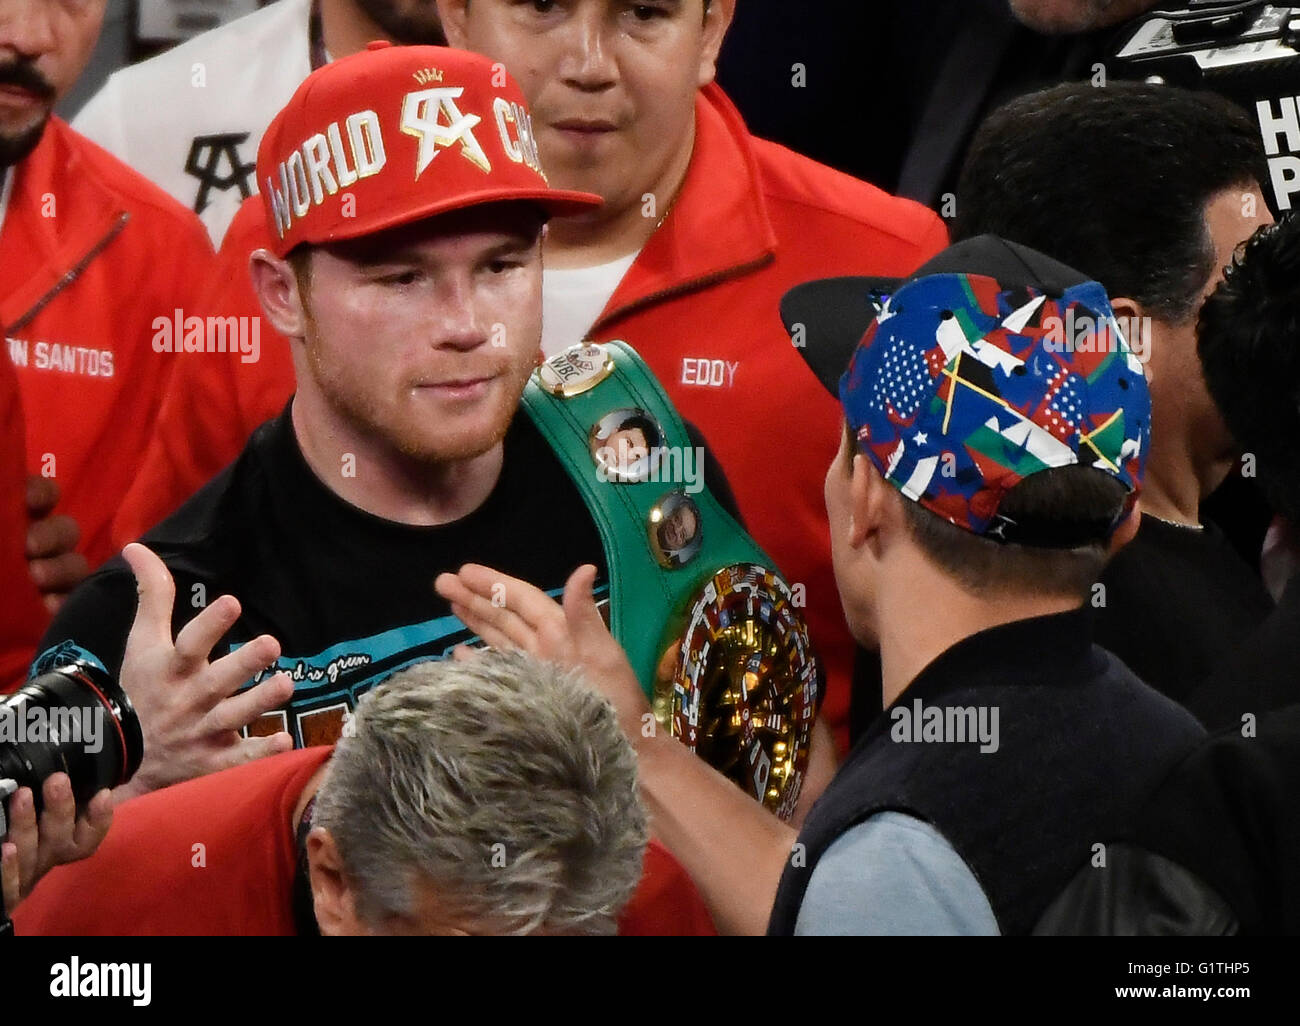 (L) Mexico's Canelo Alvarez meets up with GGG at the end of the fight after he KO Amir Khan in the 6th round for the middleweight world championship back on May 7th. Today May 18th it was announce by Canelo Alvarez ''After much consideration, today, I instructed my team at Golden Boy Promotions to continue negotiating a fight with Gennady 'GGG' Golovkin and to finalize a deal as quickly as possible. I also informed the WBC that I will vacate its title. For the entirety of my career, I have taken the fights that no one wanted because I fear no man. Never has that been more true than today Stock Photo